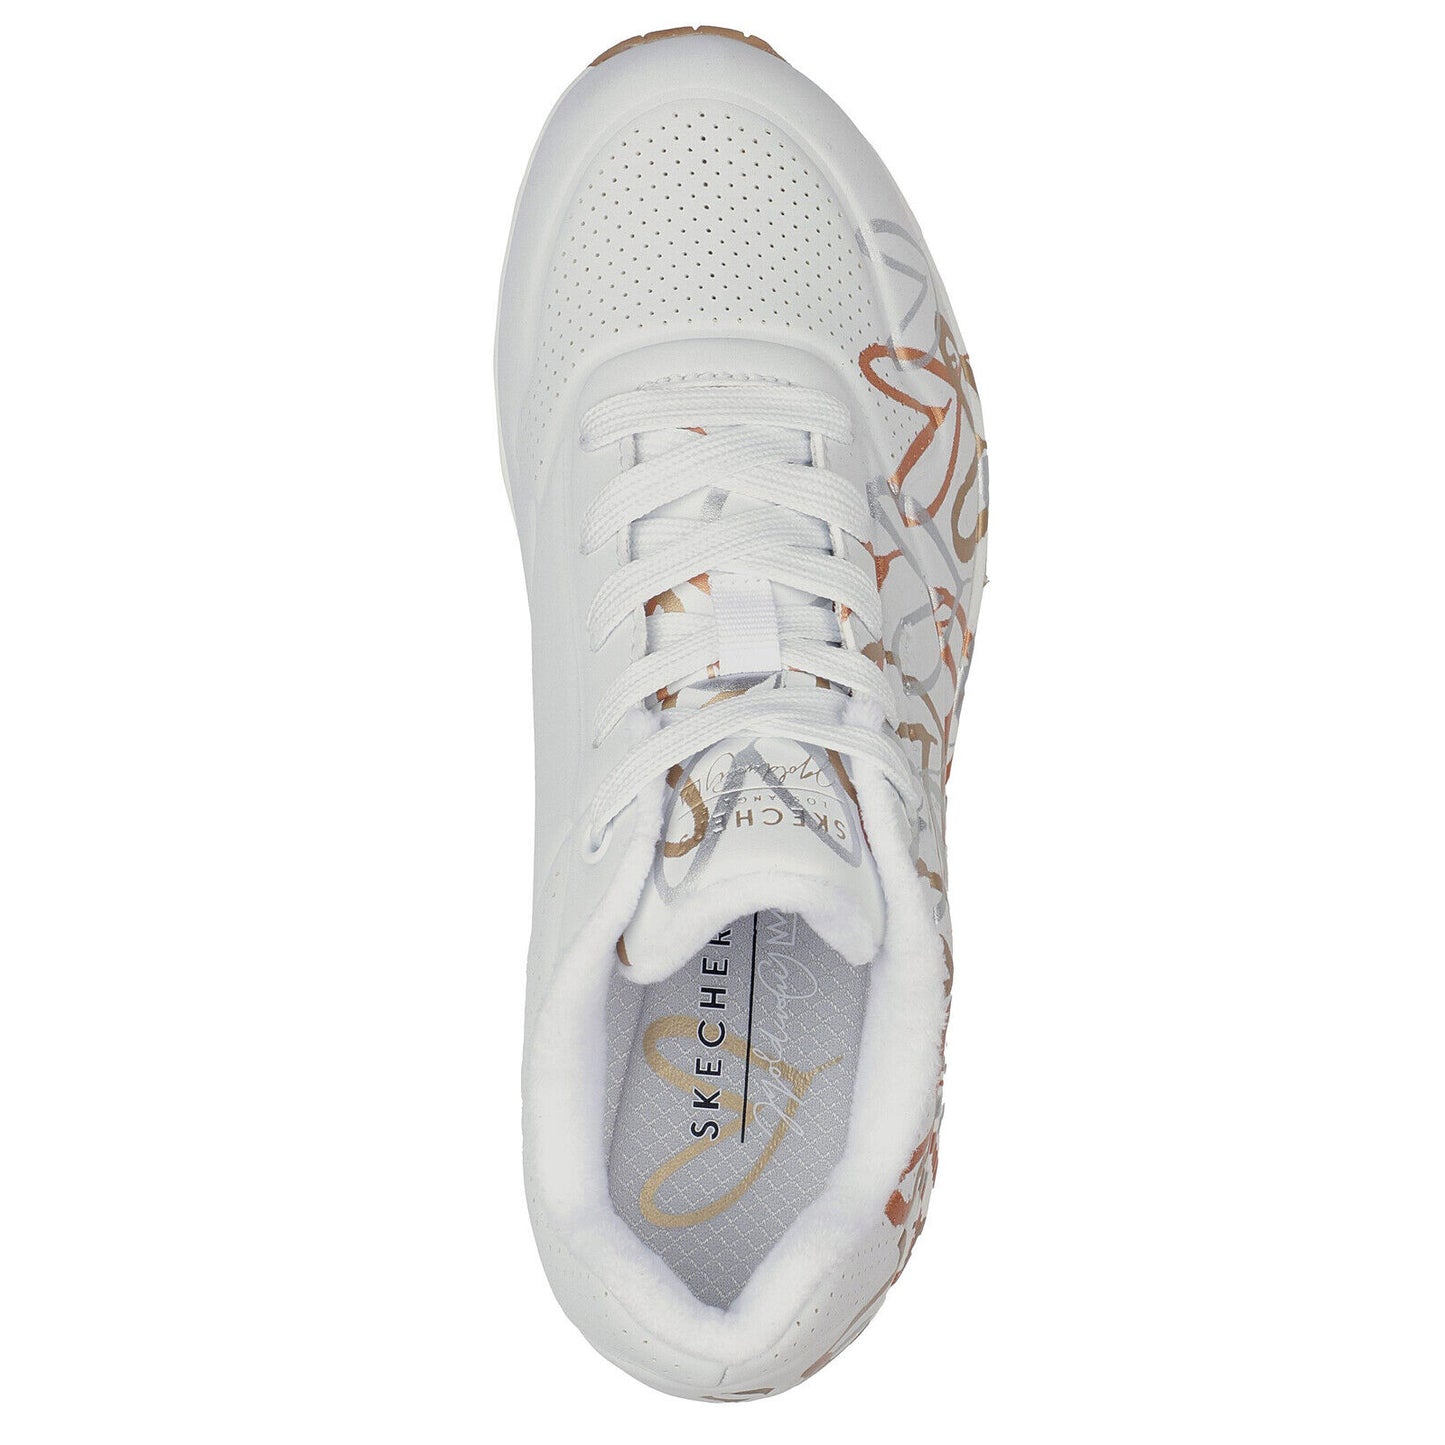 Skechers Ladies Uno Metallic Love White/Gold J Goldcrown Shoes Trainers